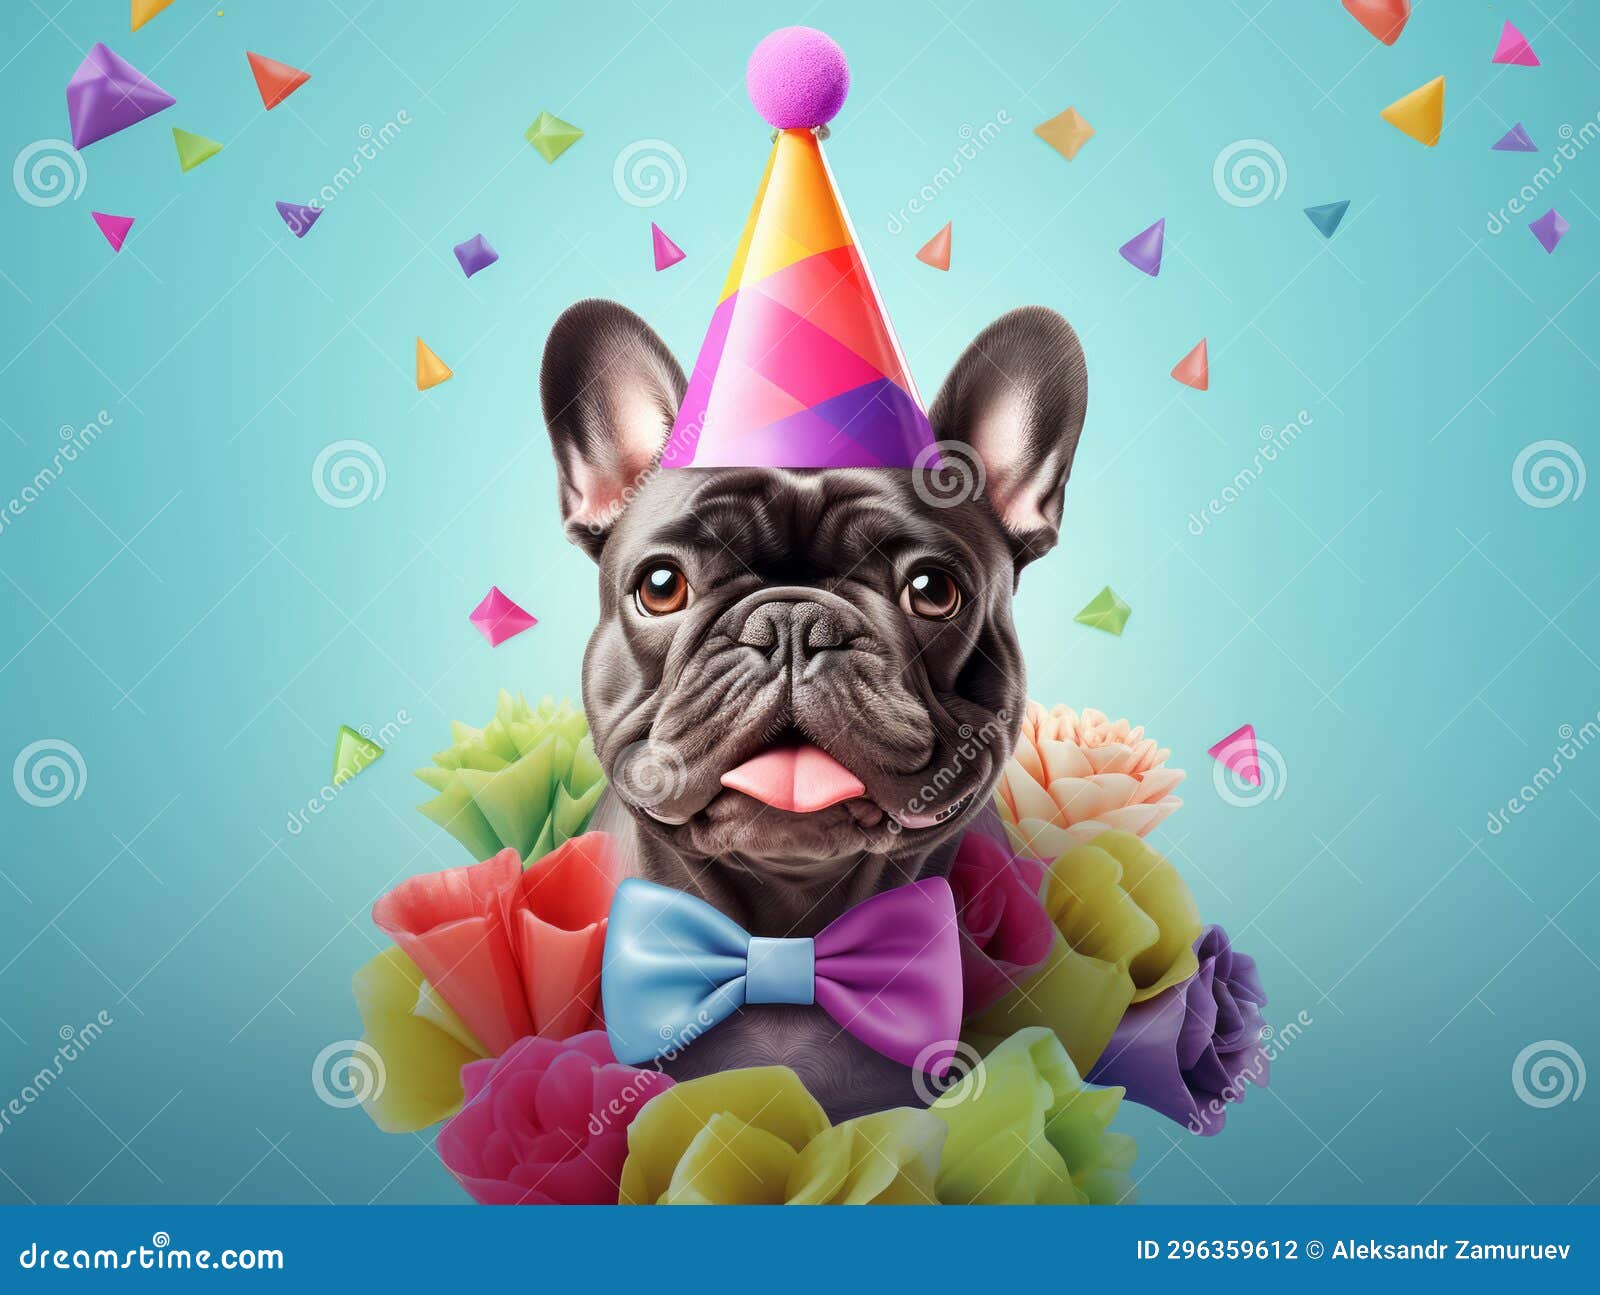 Illustration of Cute French Bulldog in Blue Birthday Hat on Colorful  Festive Background Stock Photo - Image of party, greetings: 296359612